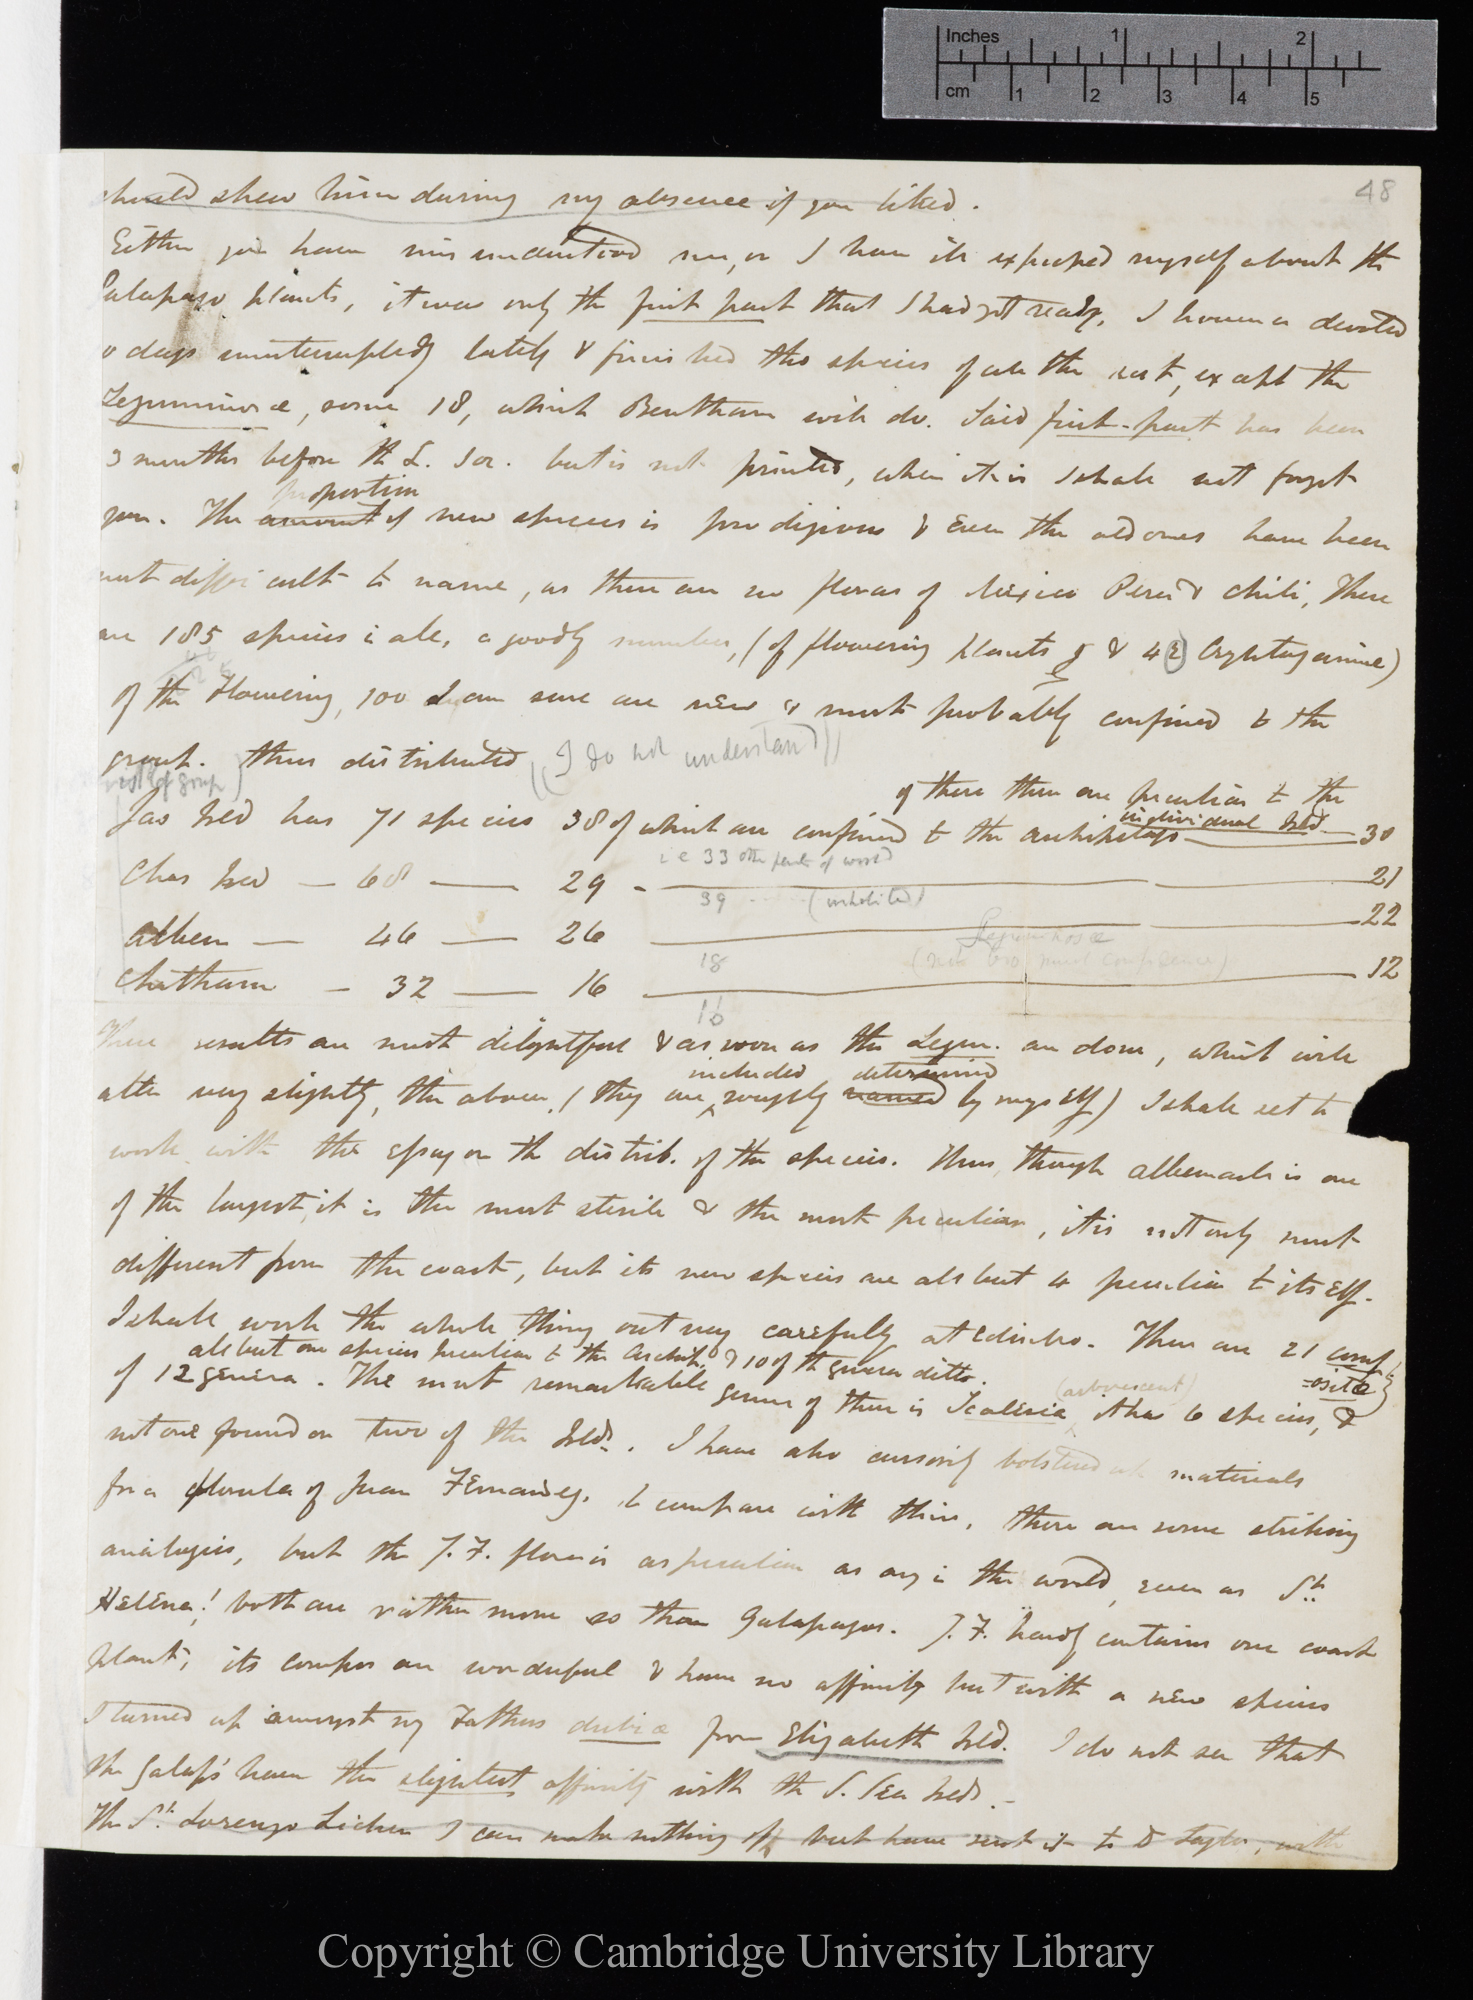 Letter from J. D. Hooker to C. R. Darwin   [28 April 1845]